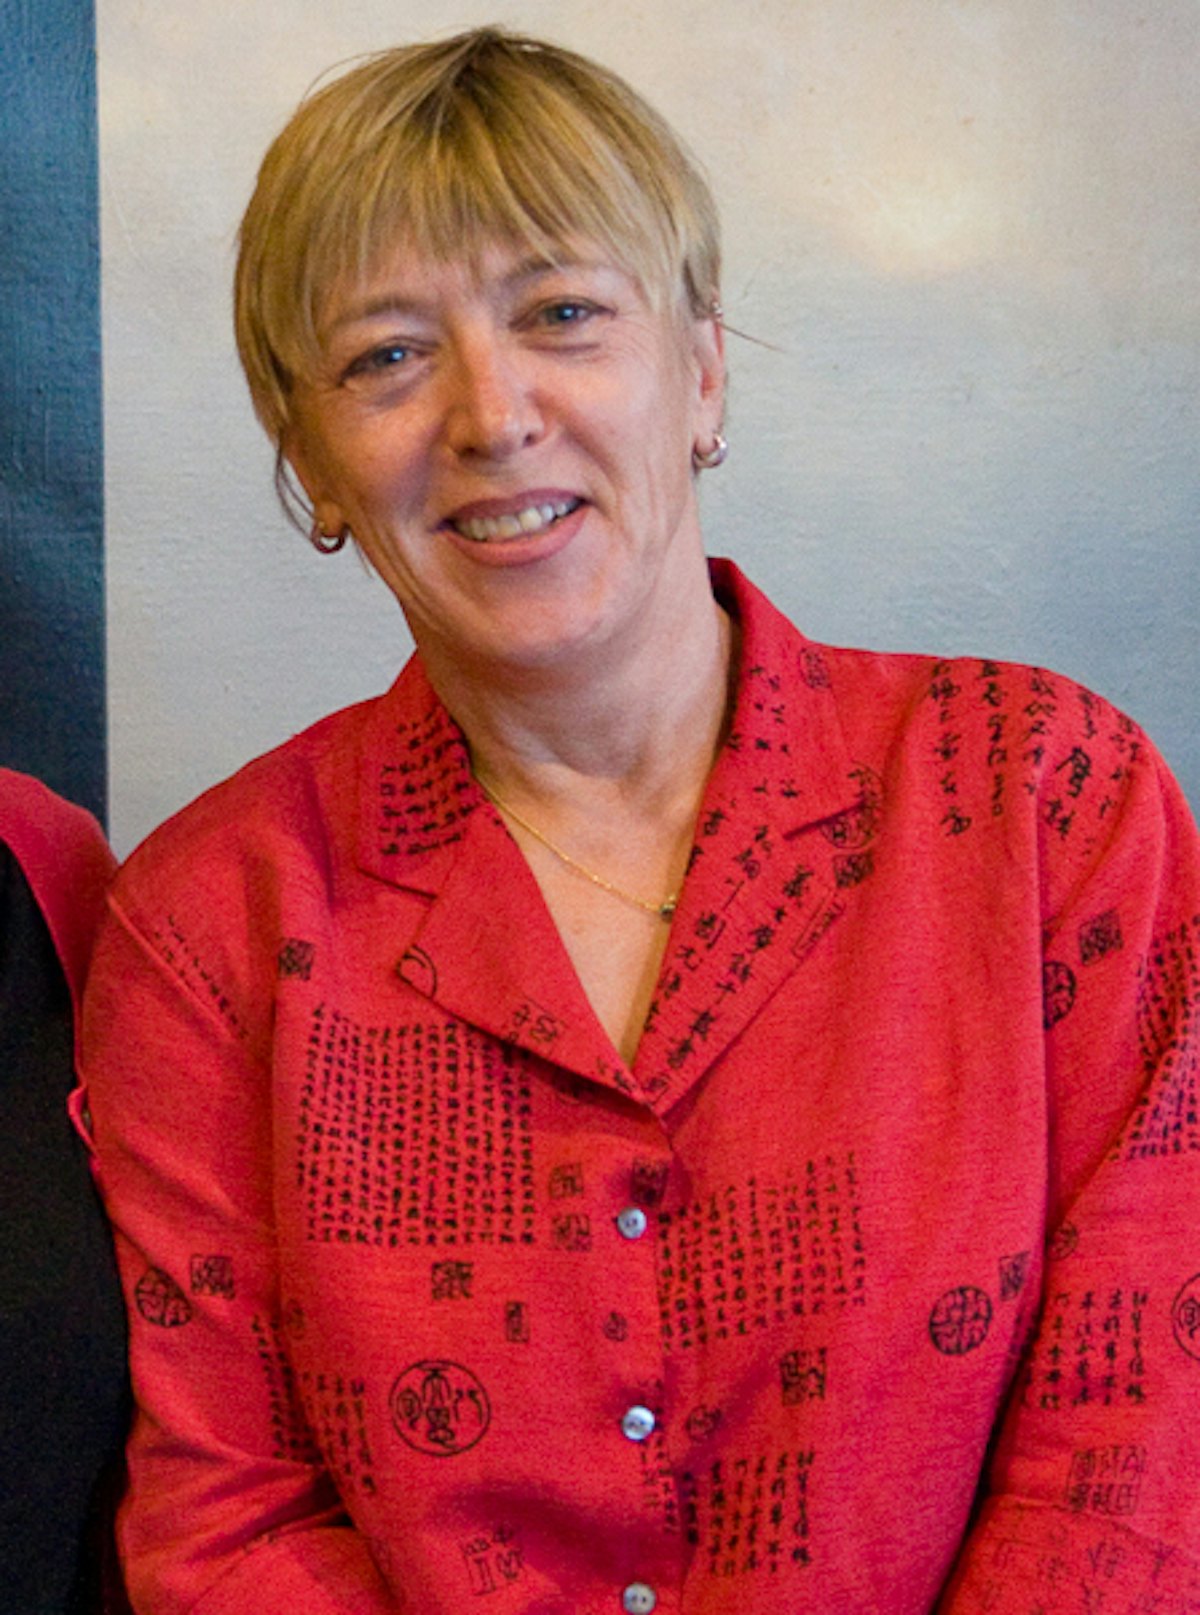 Nobel Peace laureate Jody Williams, who recently expressed her support of the right of the Baha’i community of Iran to higher education through the Education is Not a Crime campaign. (Photo courtesy of Justin Hoch)